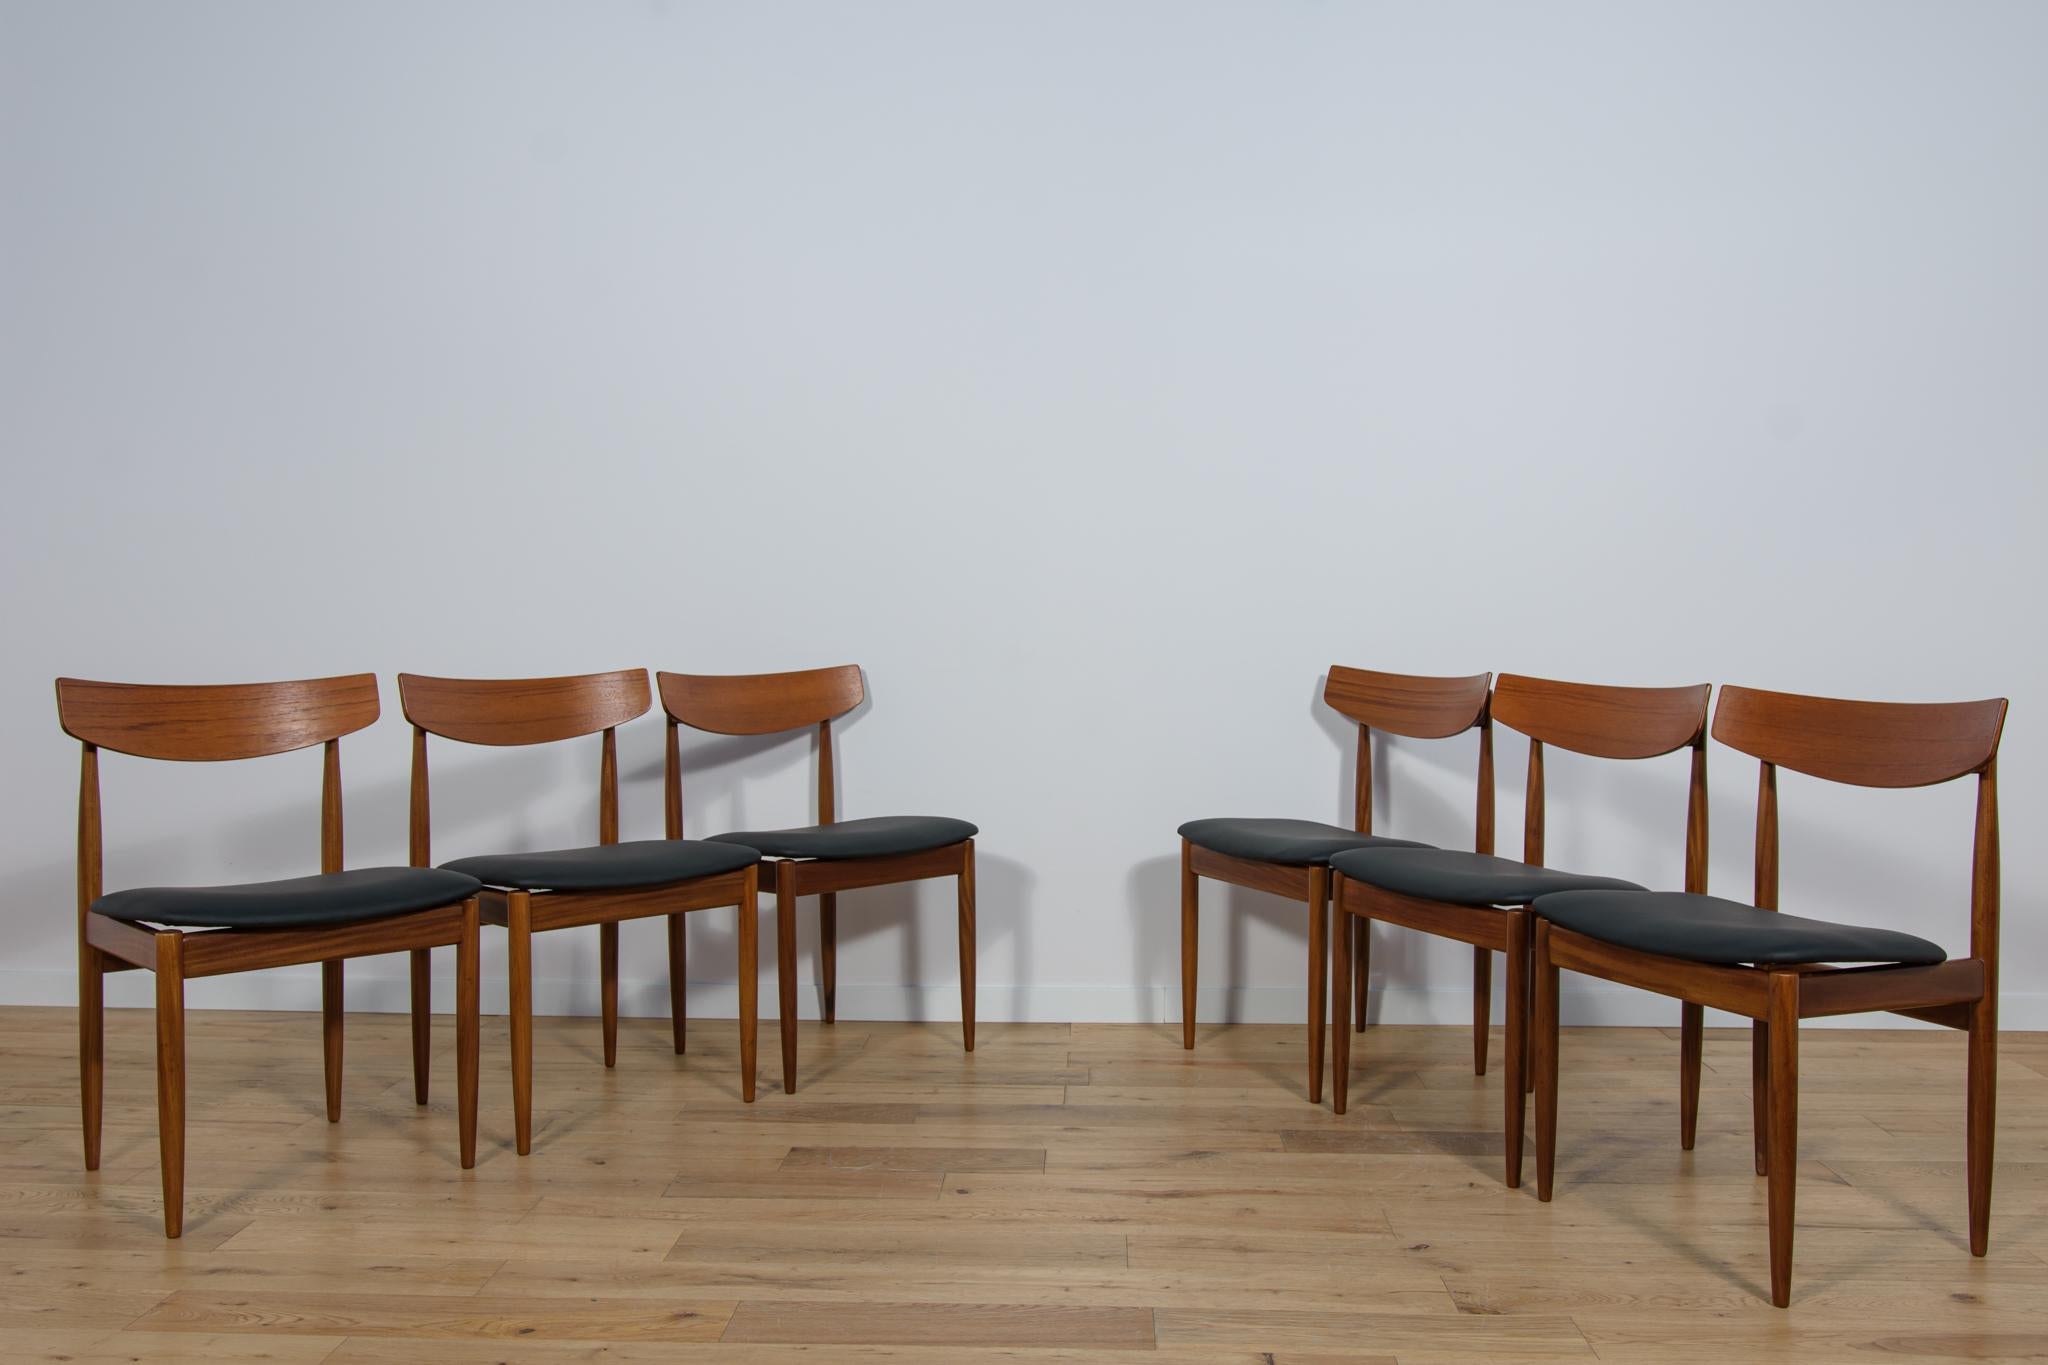 Leather Mid-Century Dining Chairs in Teak by Ib Kofod Larsen for G-Plan, 1960s. For Sale